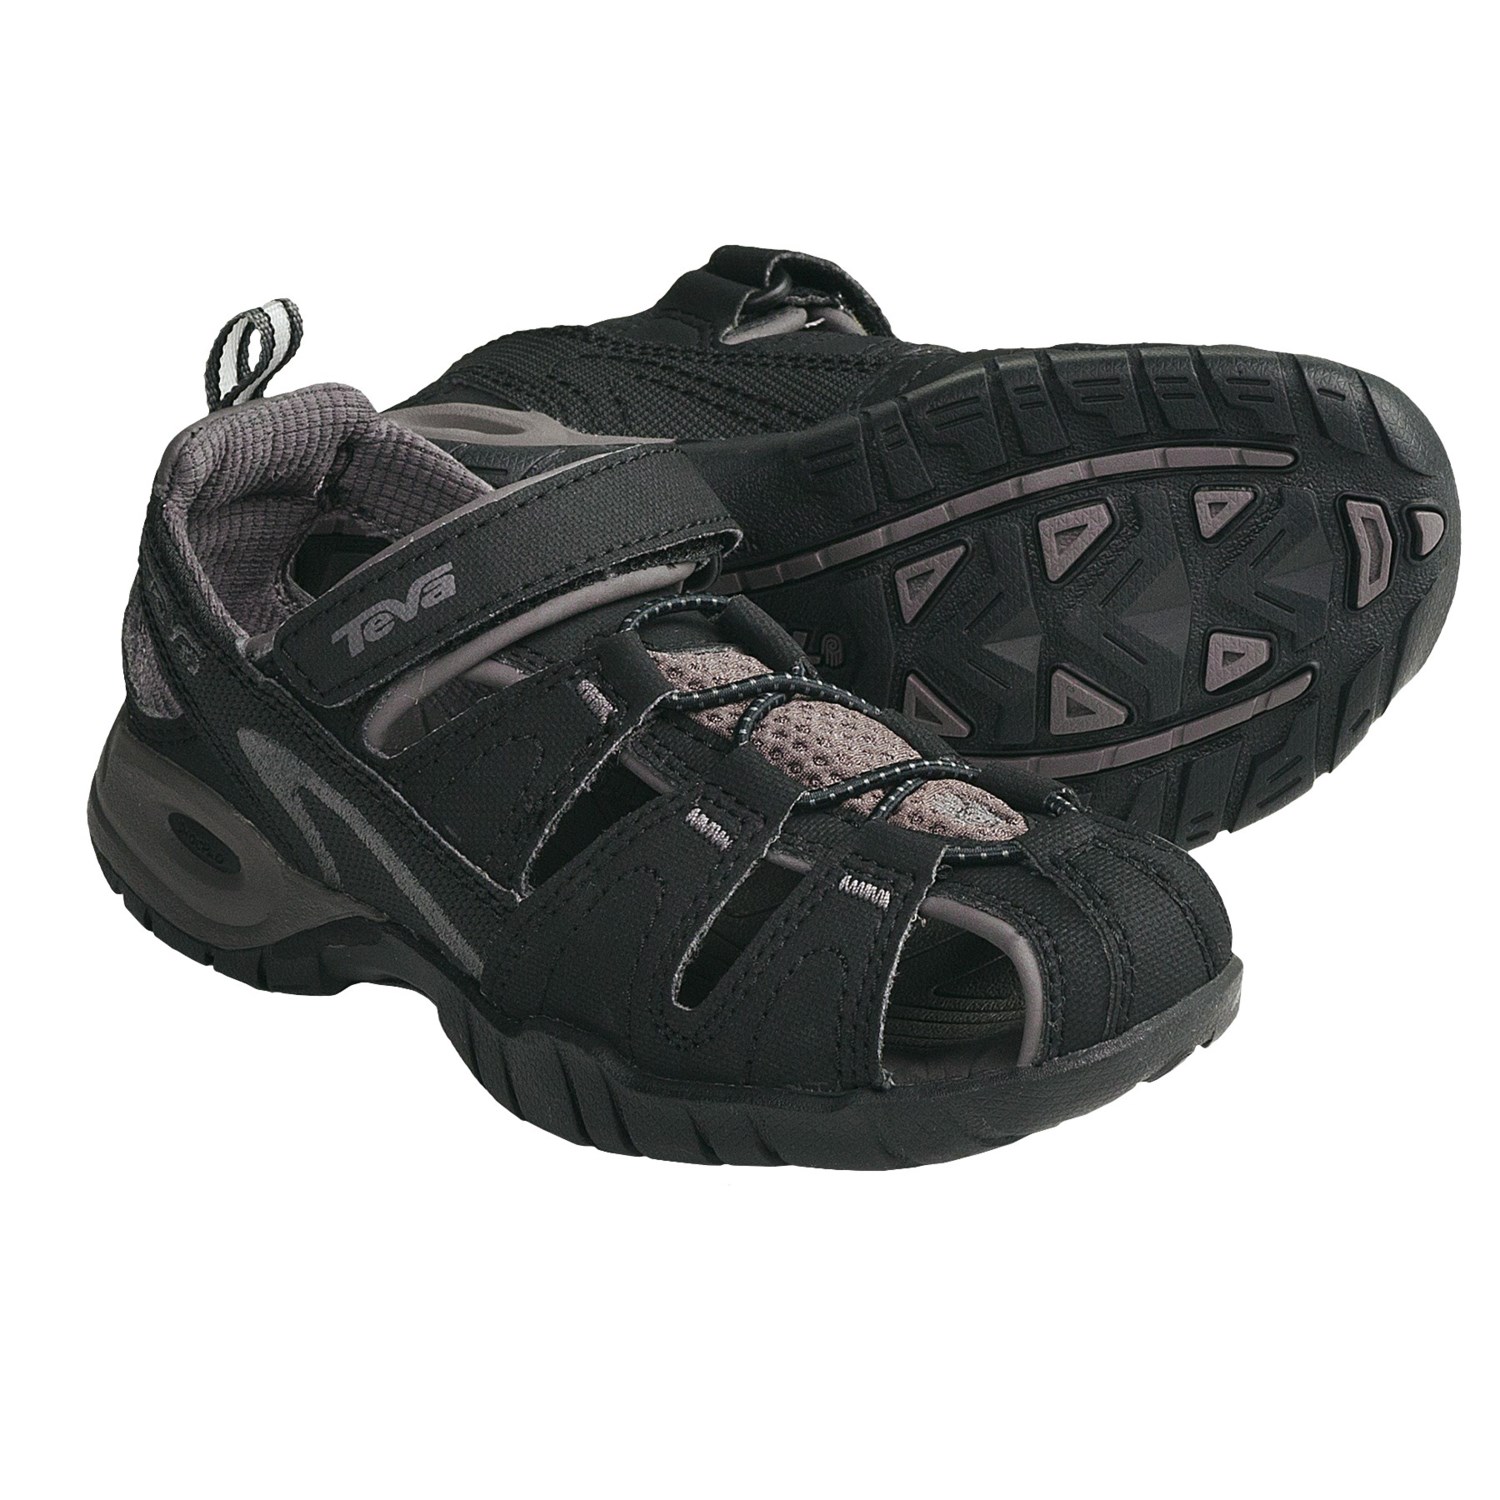 Teva Dozer 3 Sandals (For Kids and Youth) - Save 64%